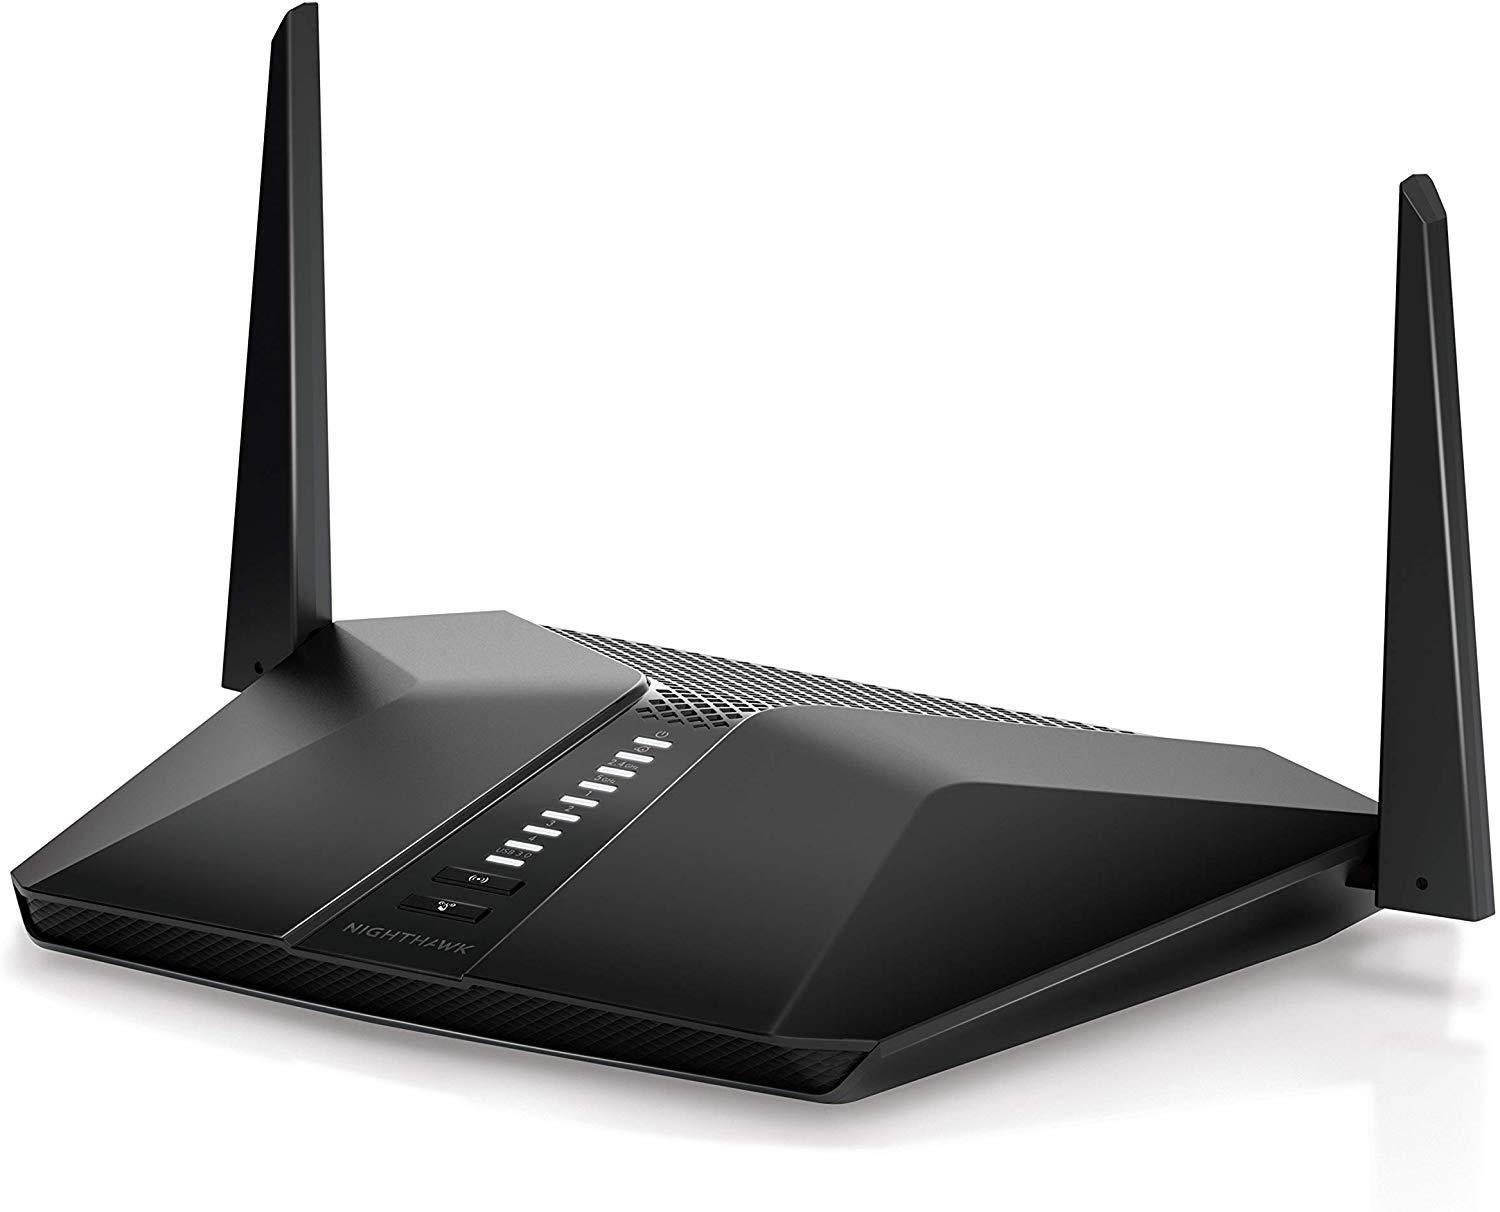 Bargains on Amazon on devices to improve Wi-Fi speed